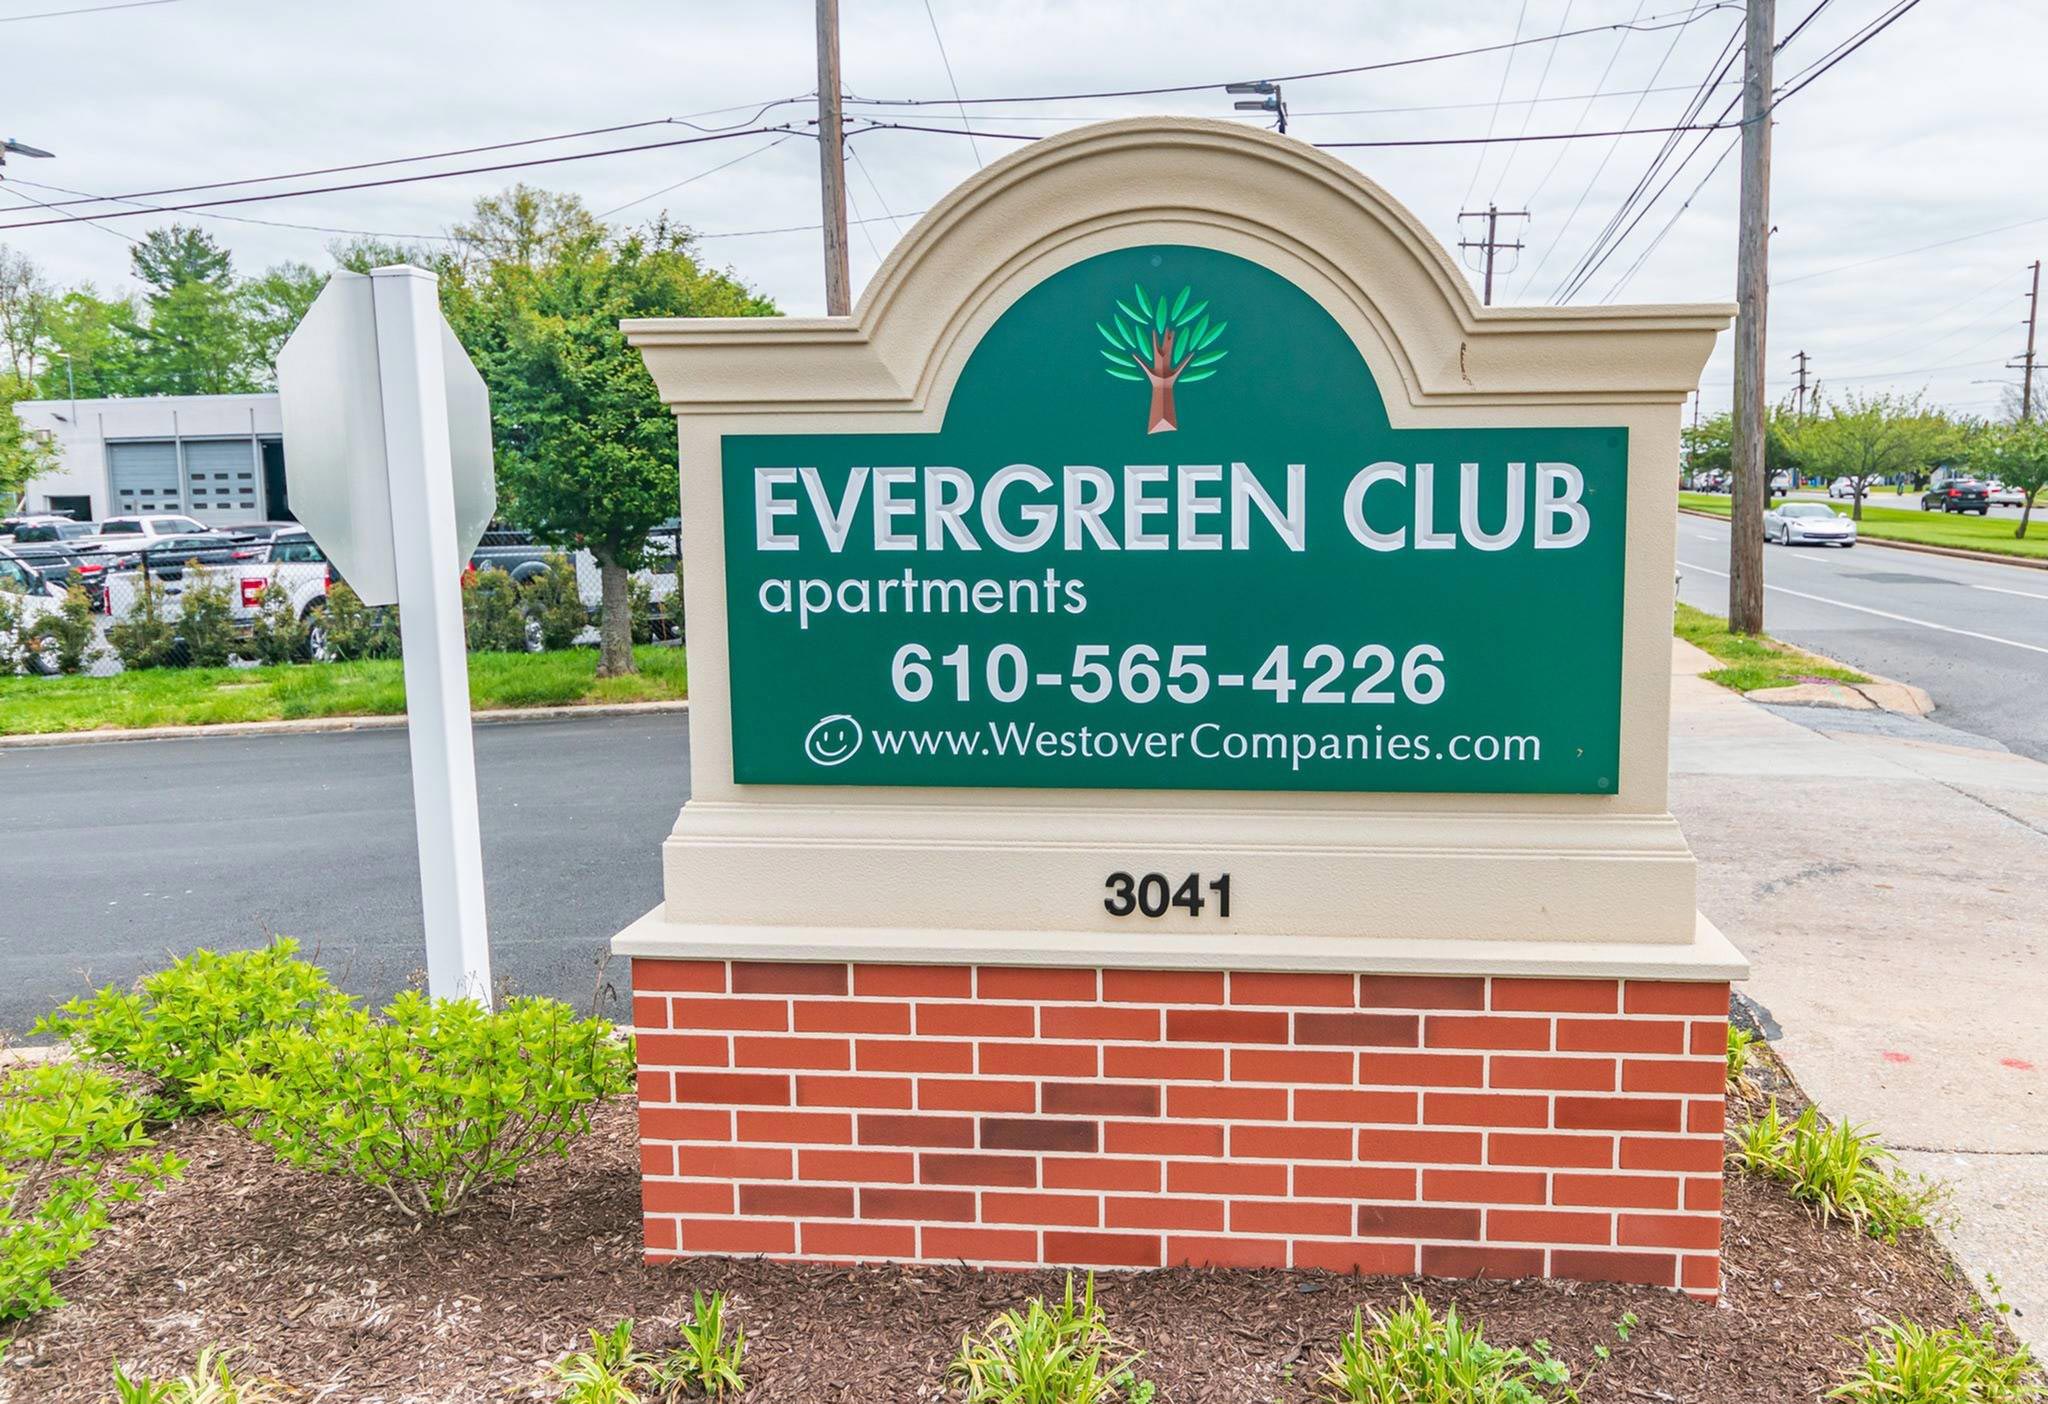 Evergreen Club Apartments entrance sign.